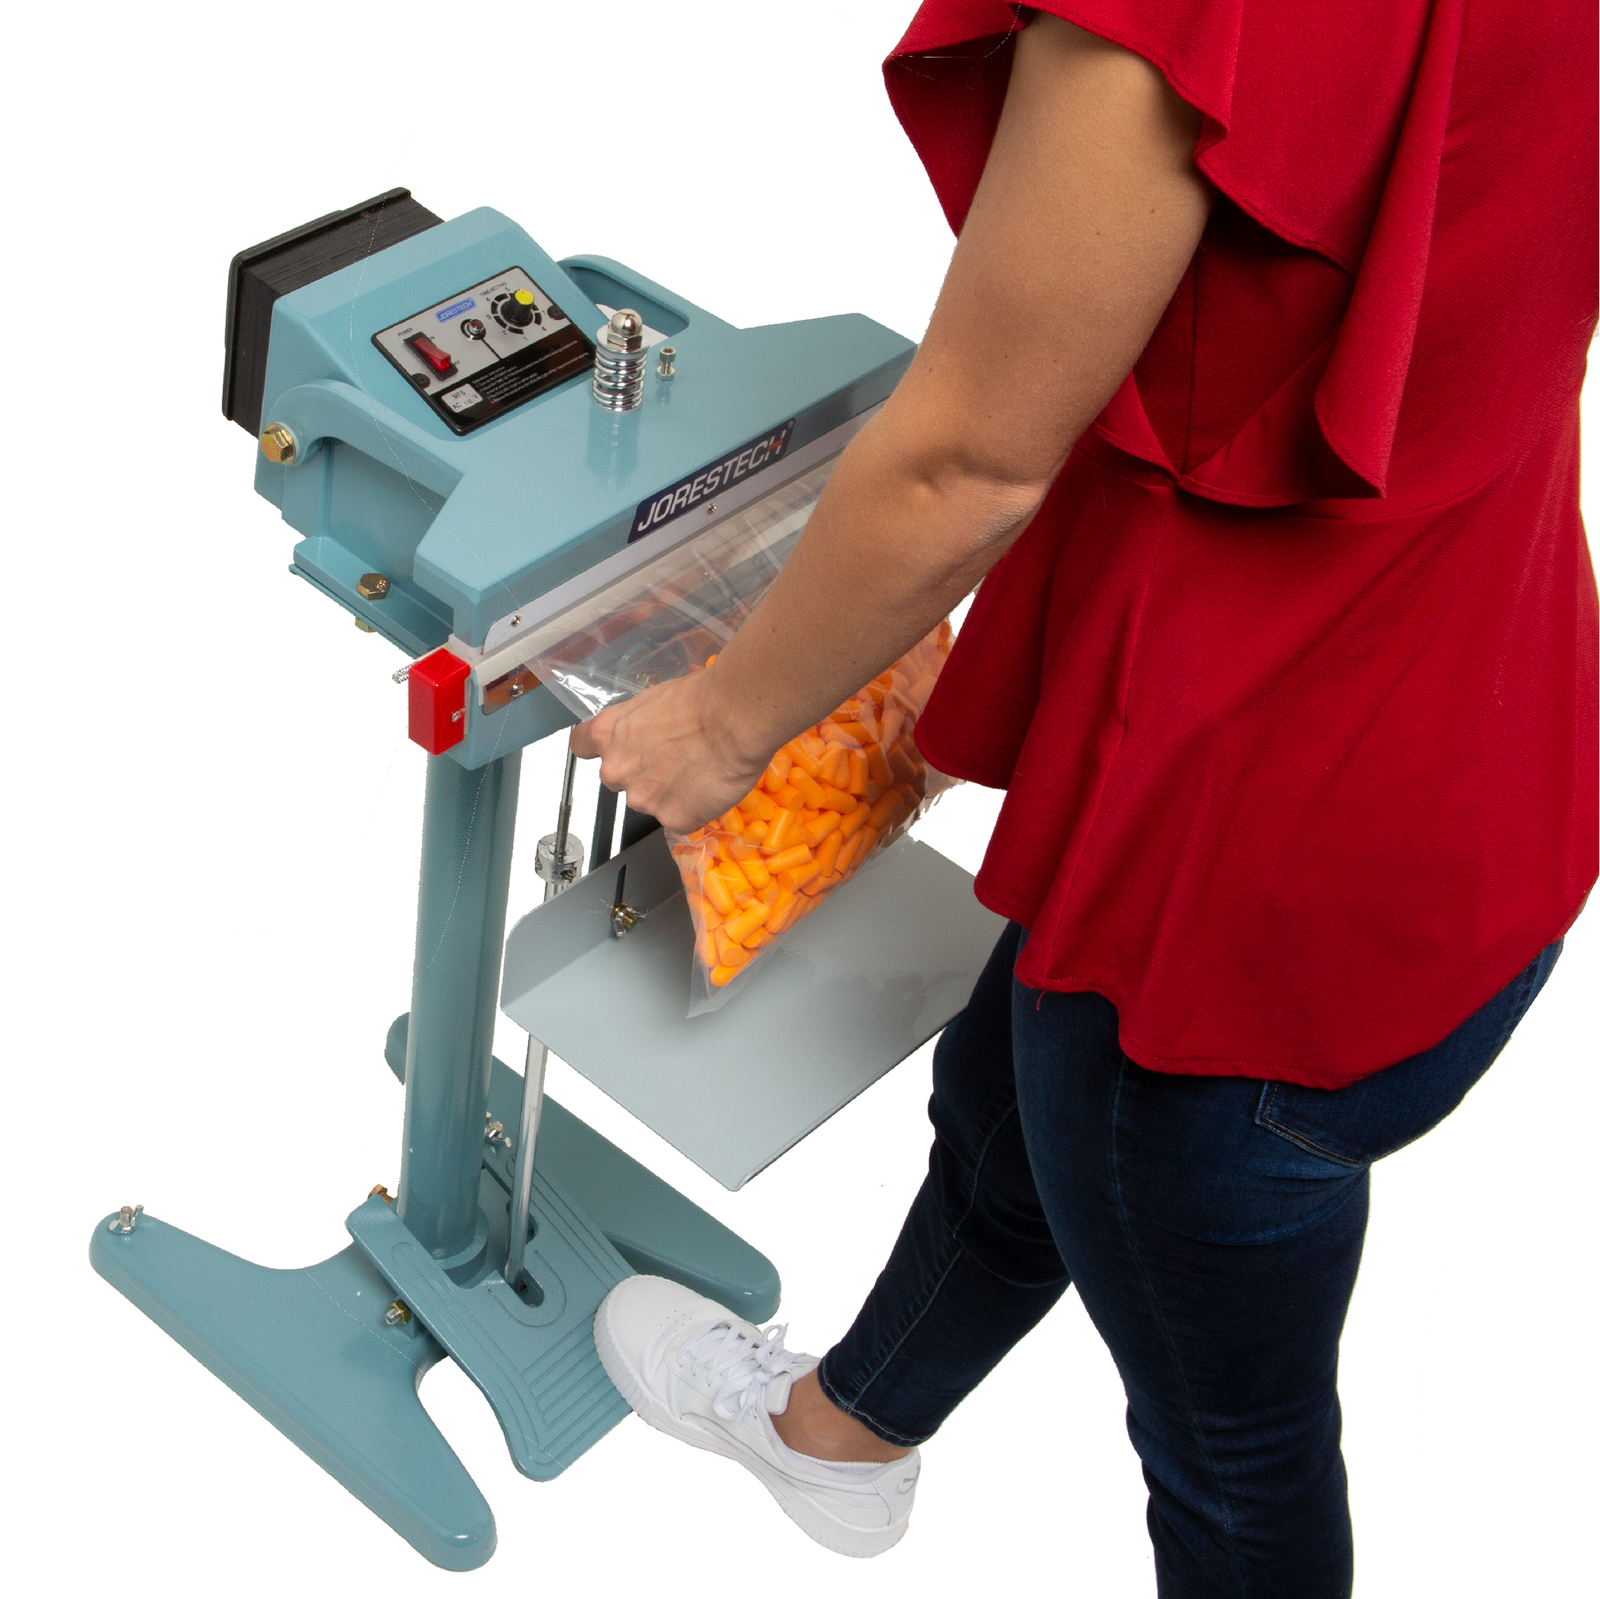 A worker wearing a red shirt and jeans. She is sealing a large bag filled with earplugs using a foot impulse bag sealer